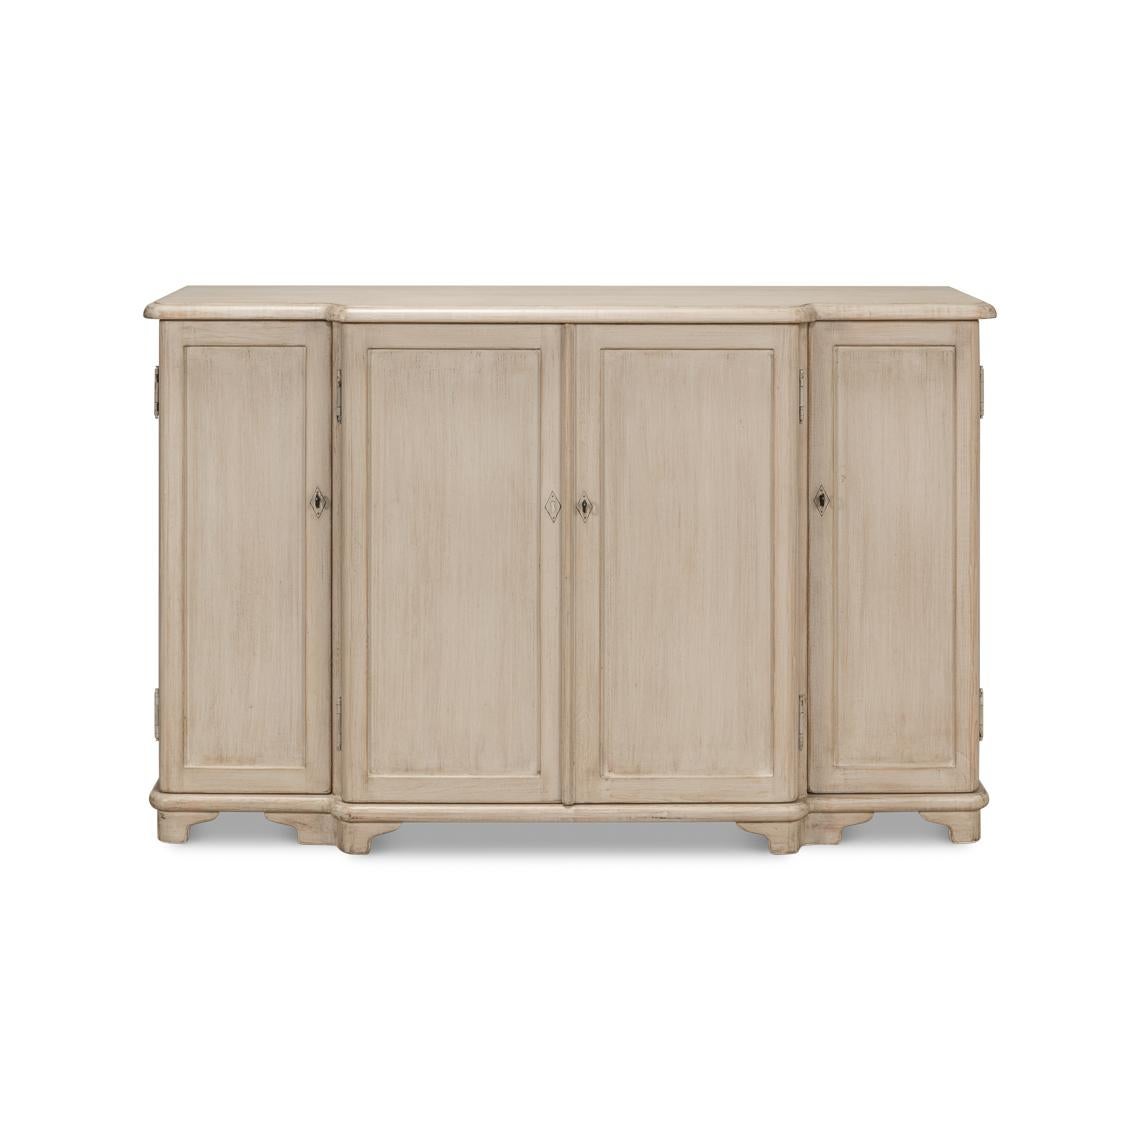 The classic breakfront design adds subtle interest, with an ogee molded edge top, a four-door compartment that provides practical storage space. Ideal for keeping dining essentials or as a living room organizer, this cabinet offers a straightforward